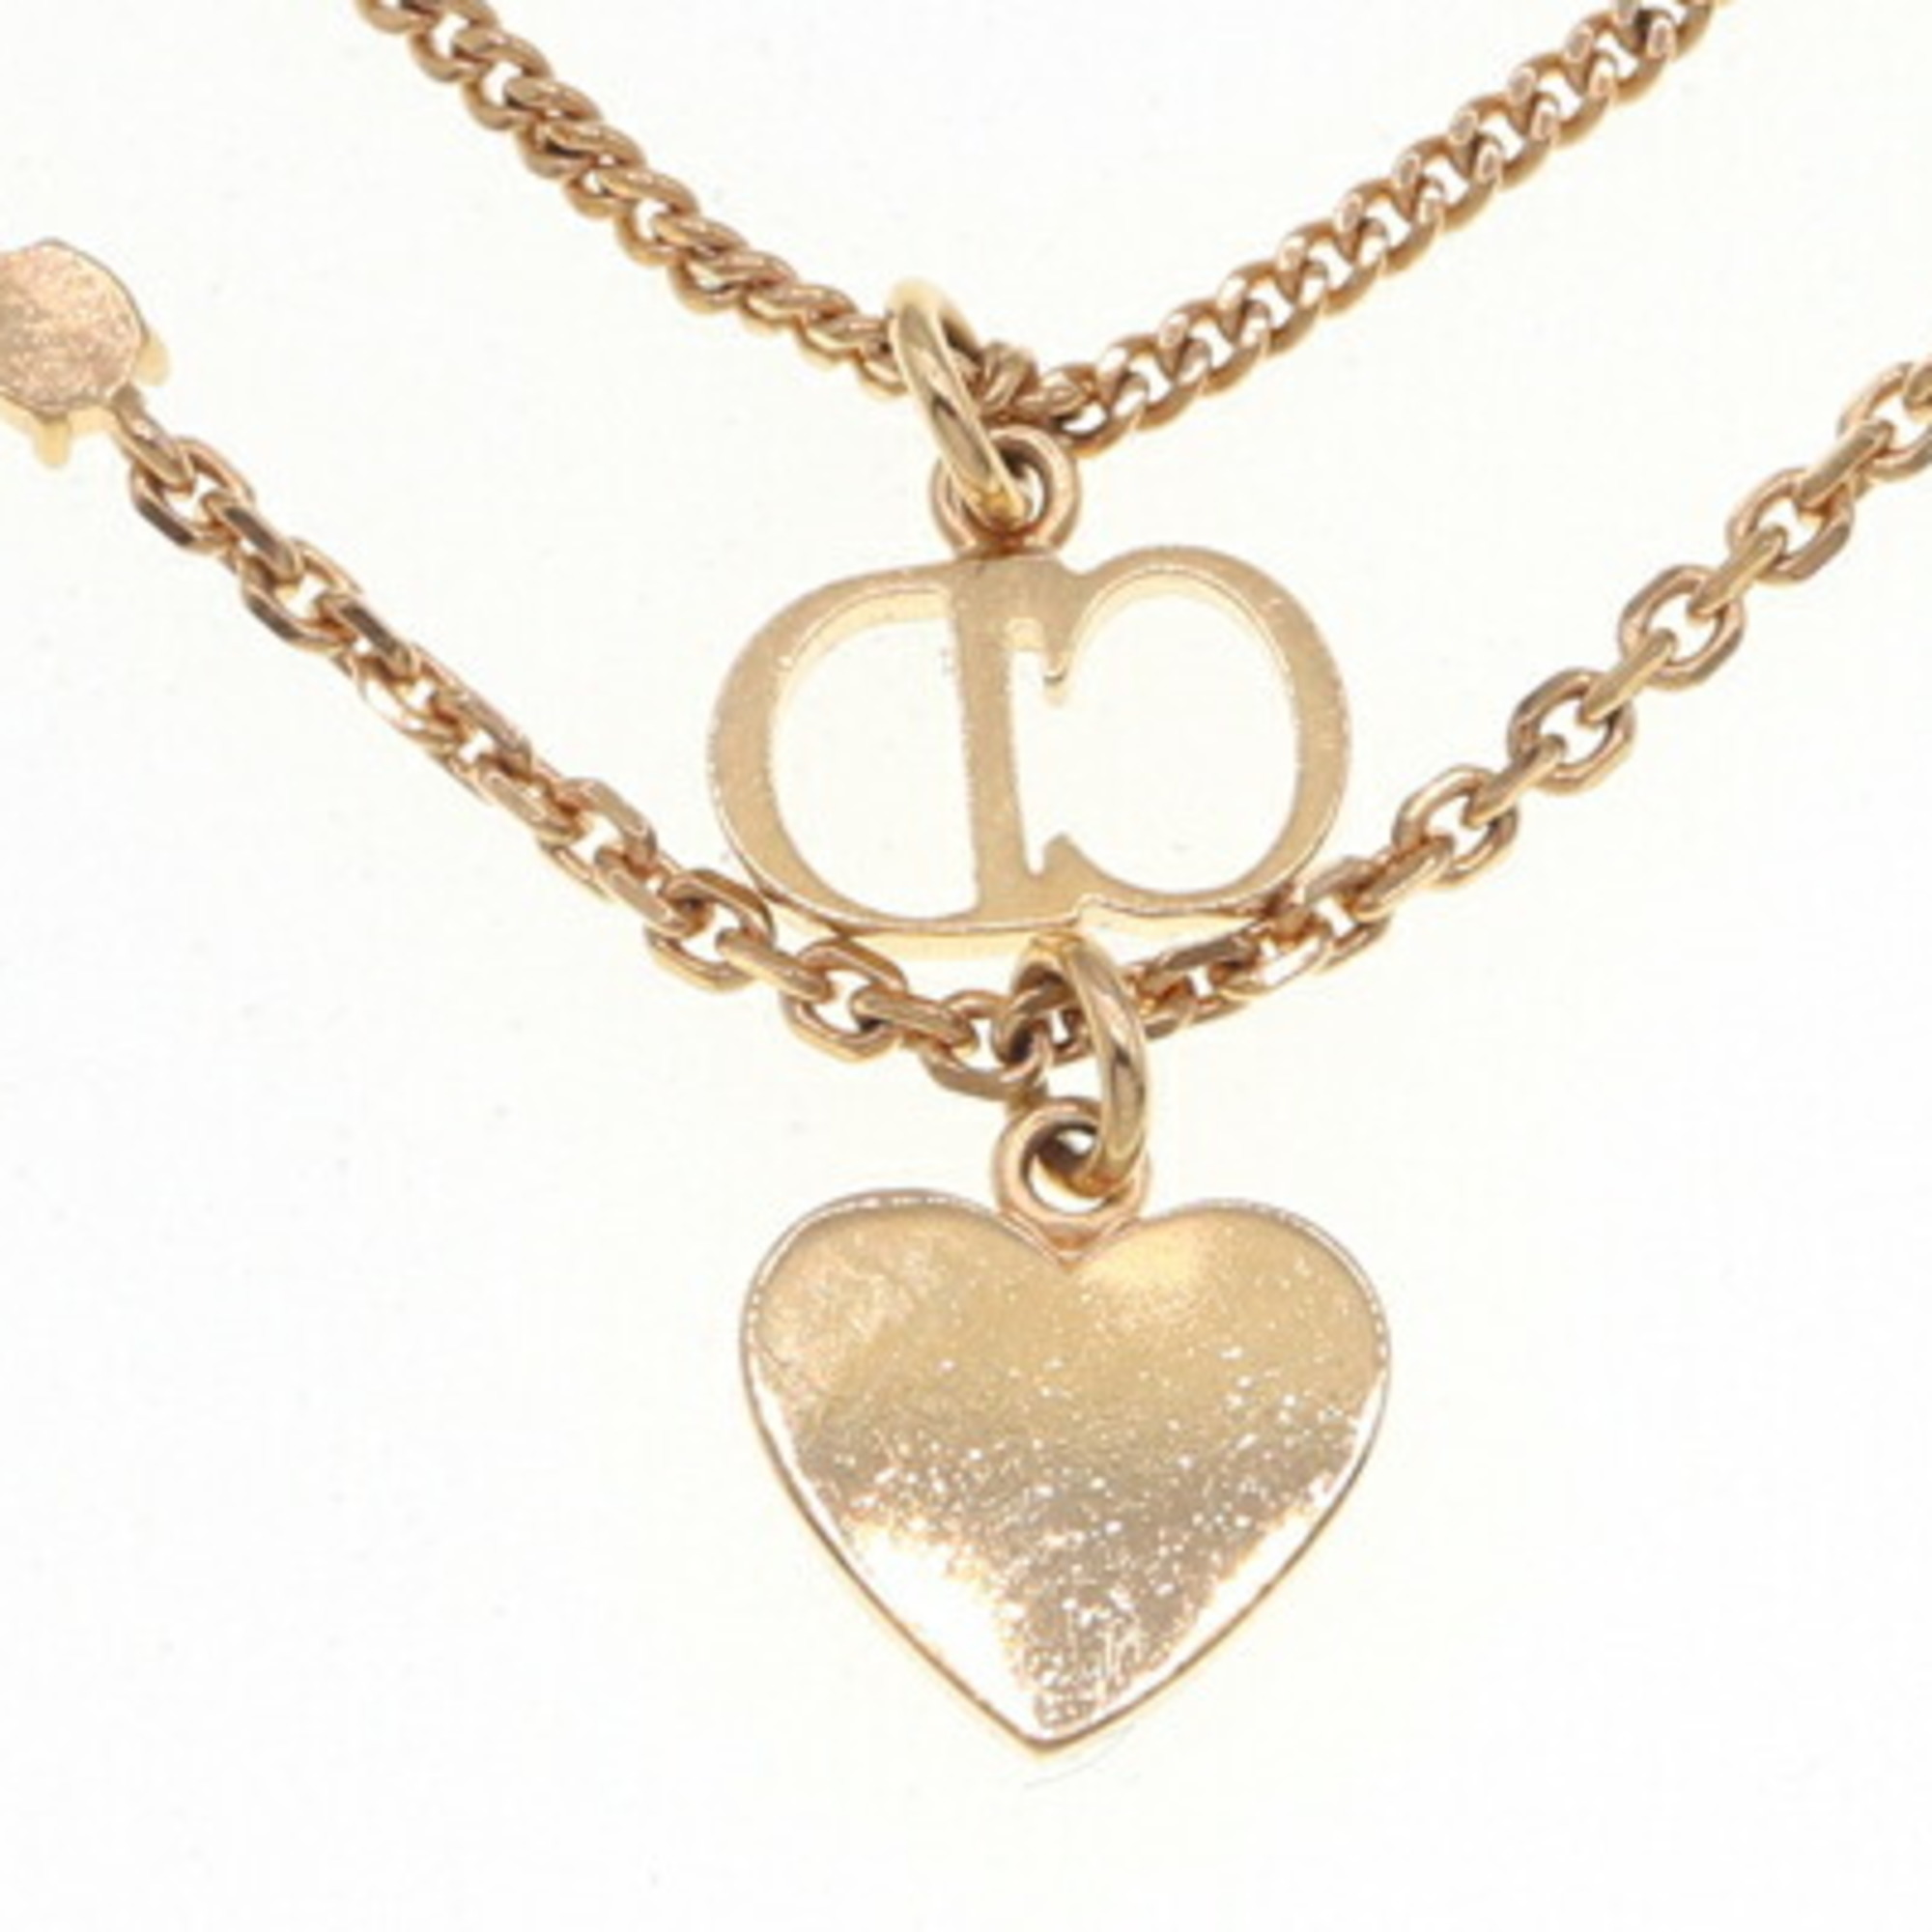 Christian Dior Dior Necklace Clair D Lune Gold Metal Rhinestone Heart CD Pendant Women's Double DIOR